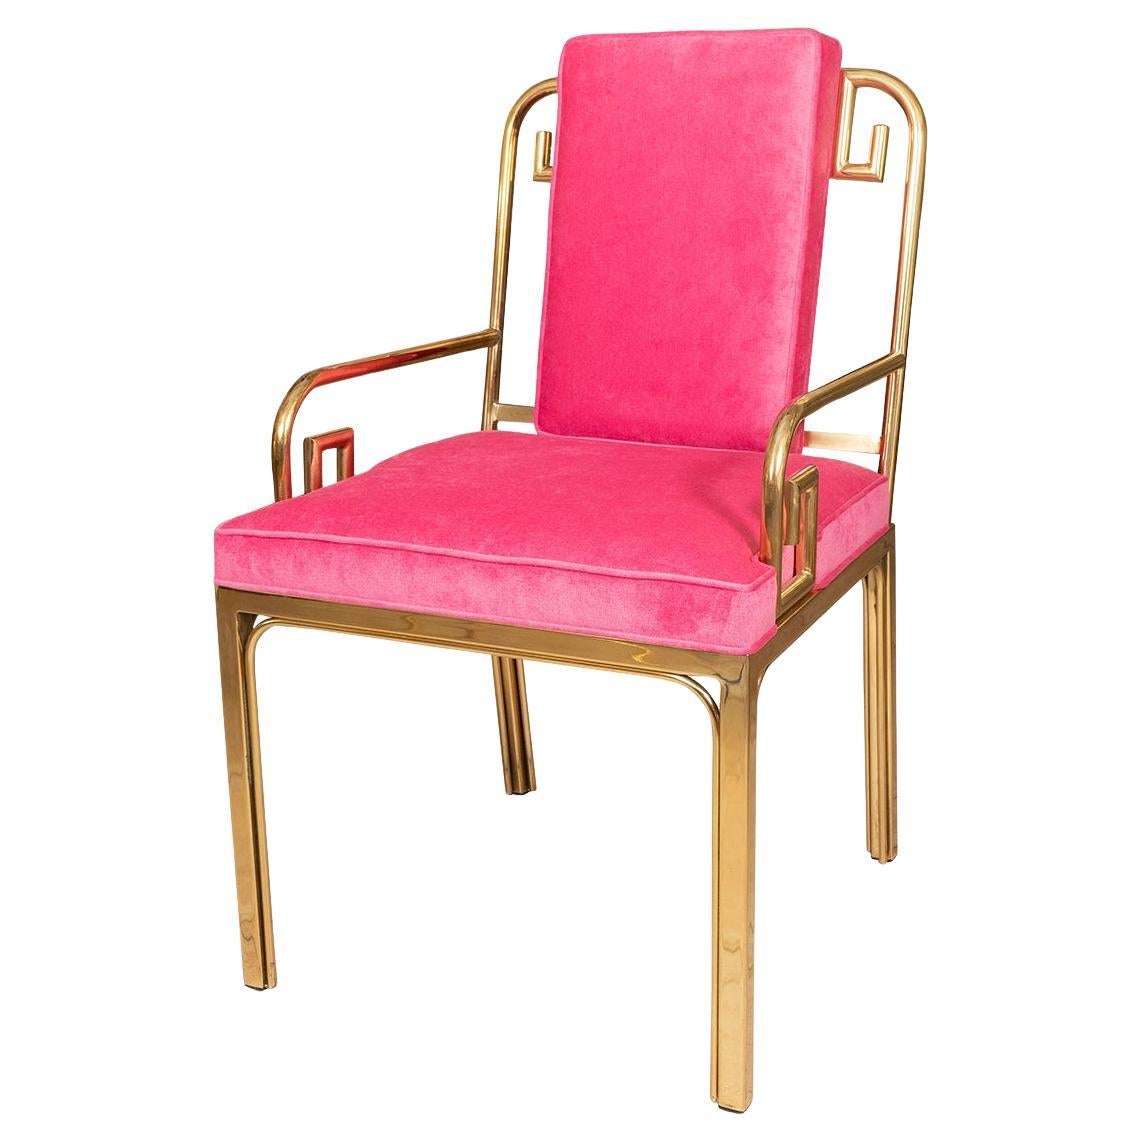 Brass campaign style chair For Sale